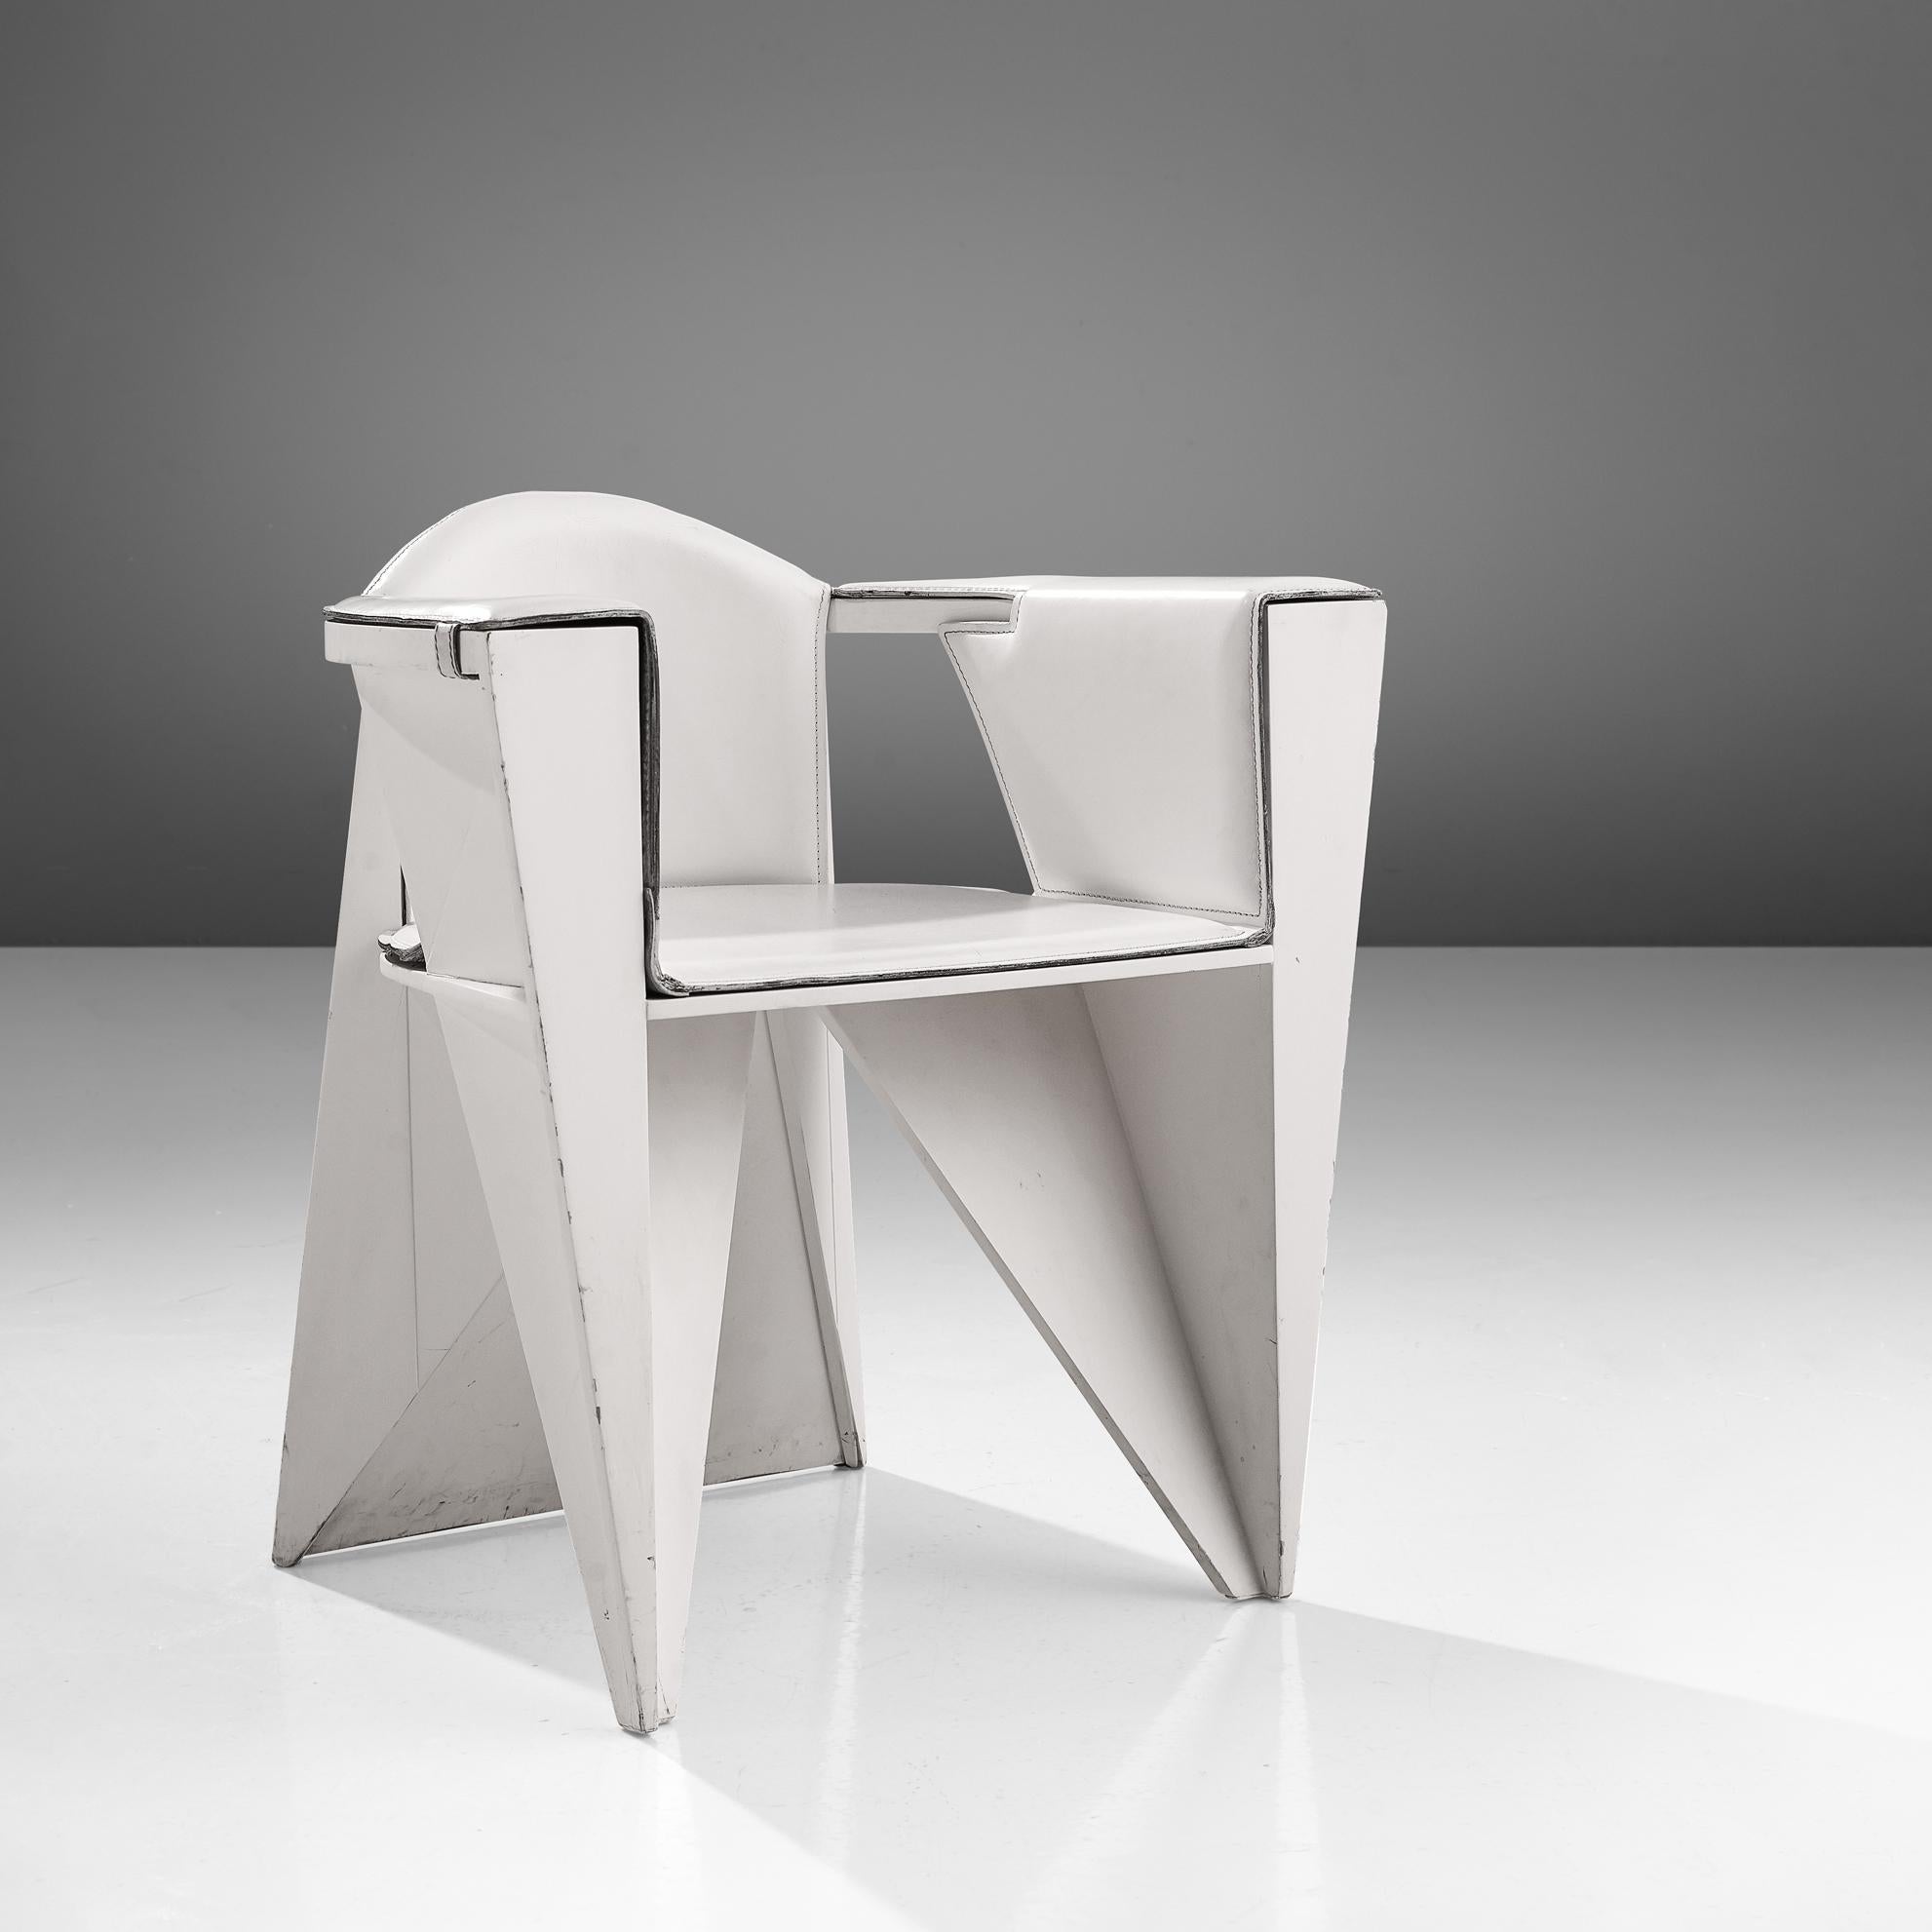 Adriano & Paolo Suman for Giorgetti Spa, armchair, white lacquered beech and leather, Italy, 1984

Geometric Postmodern armchair designed by Adriano & Paolo Suman and manufactured by Giorgetti Spa. This model chair is from the Matrix series designed